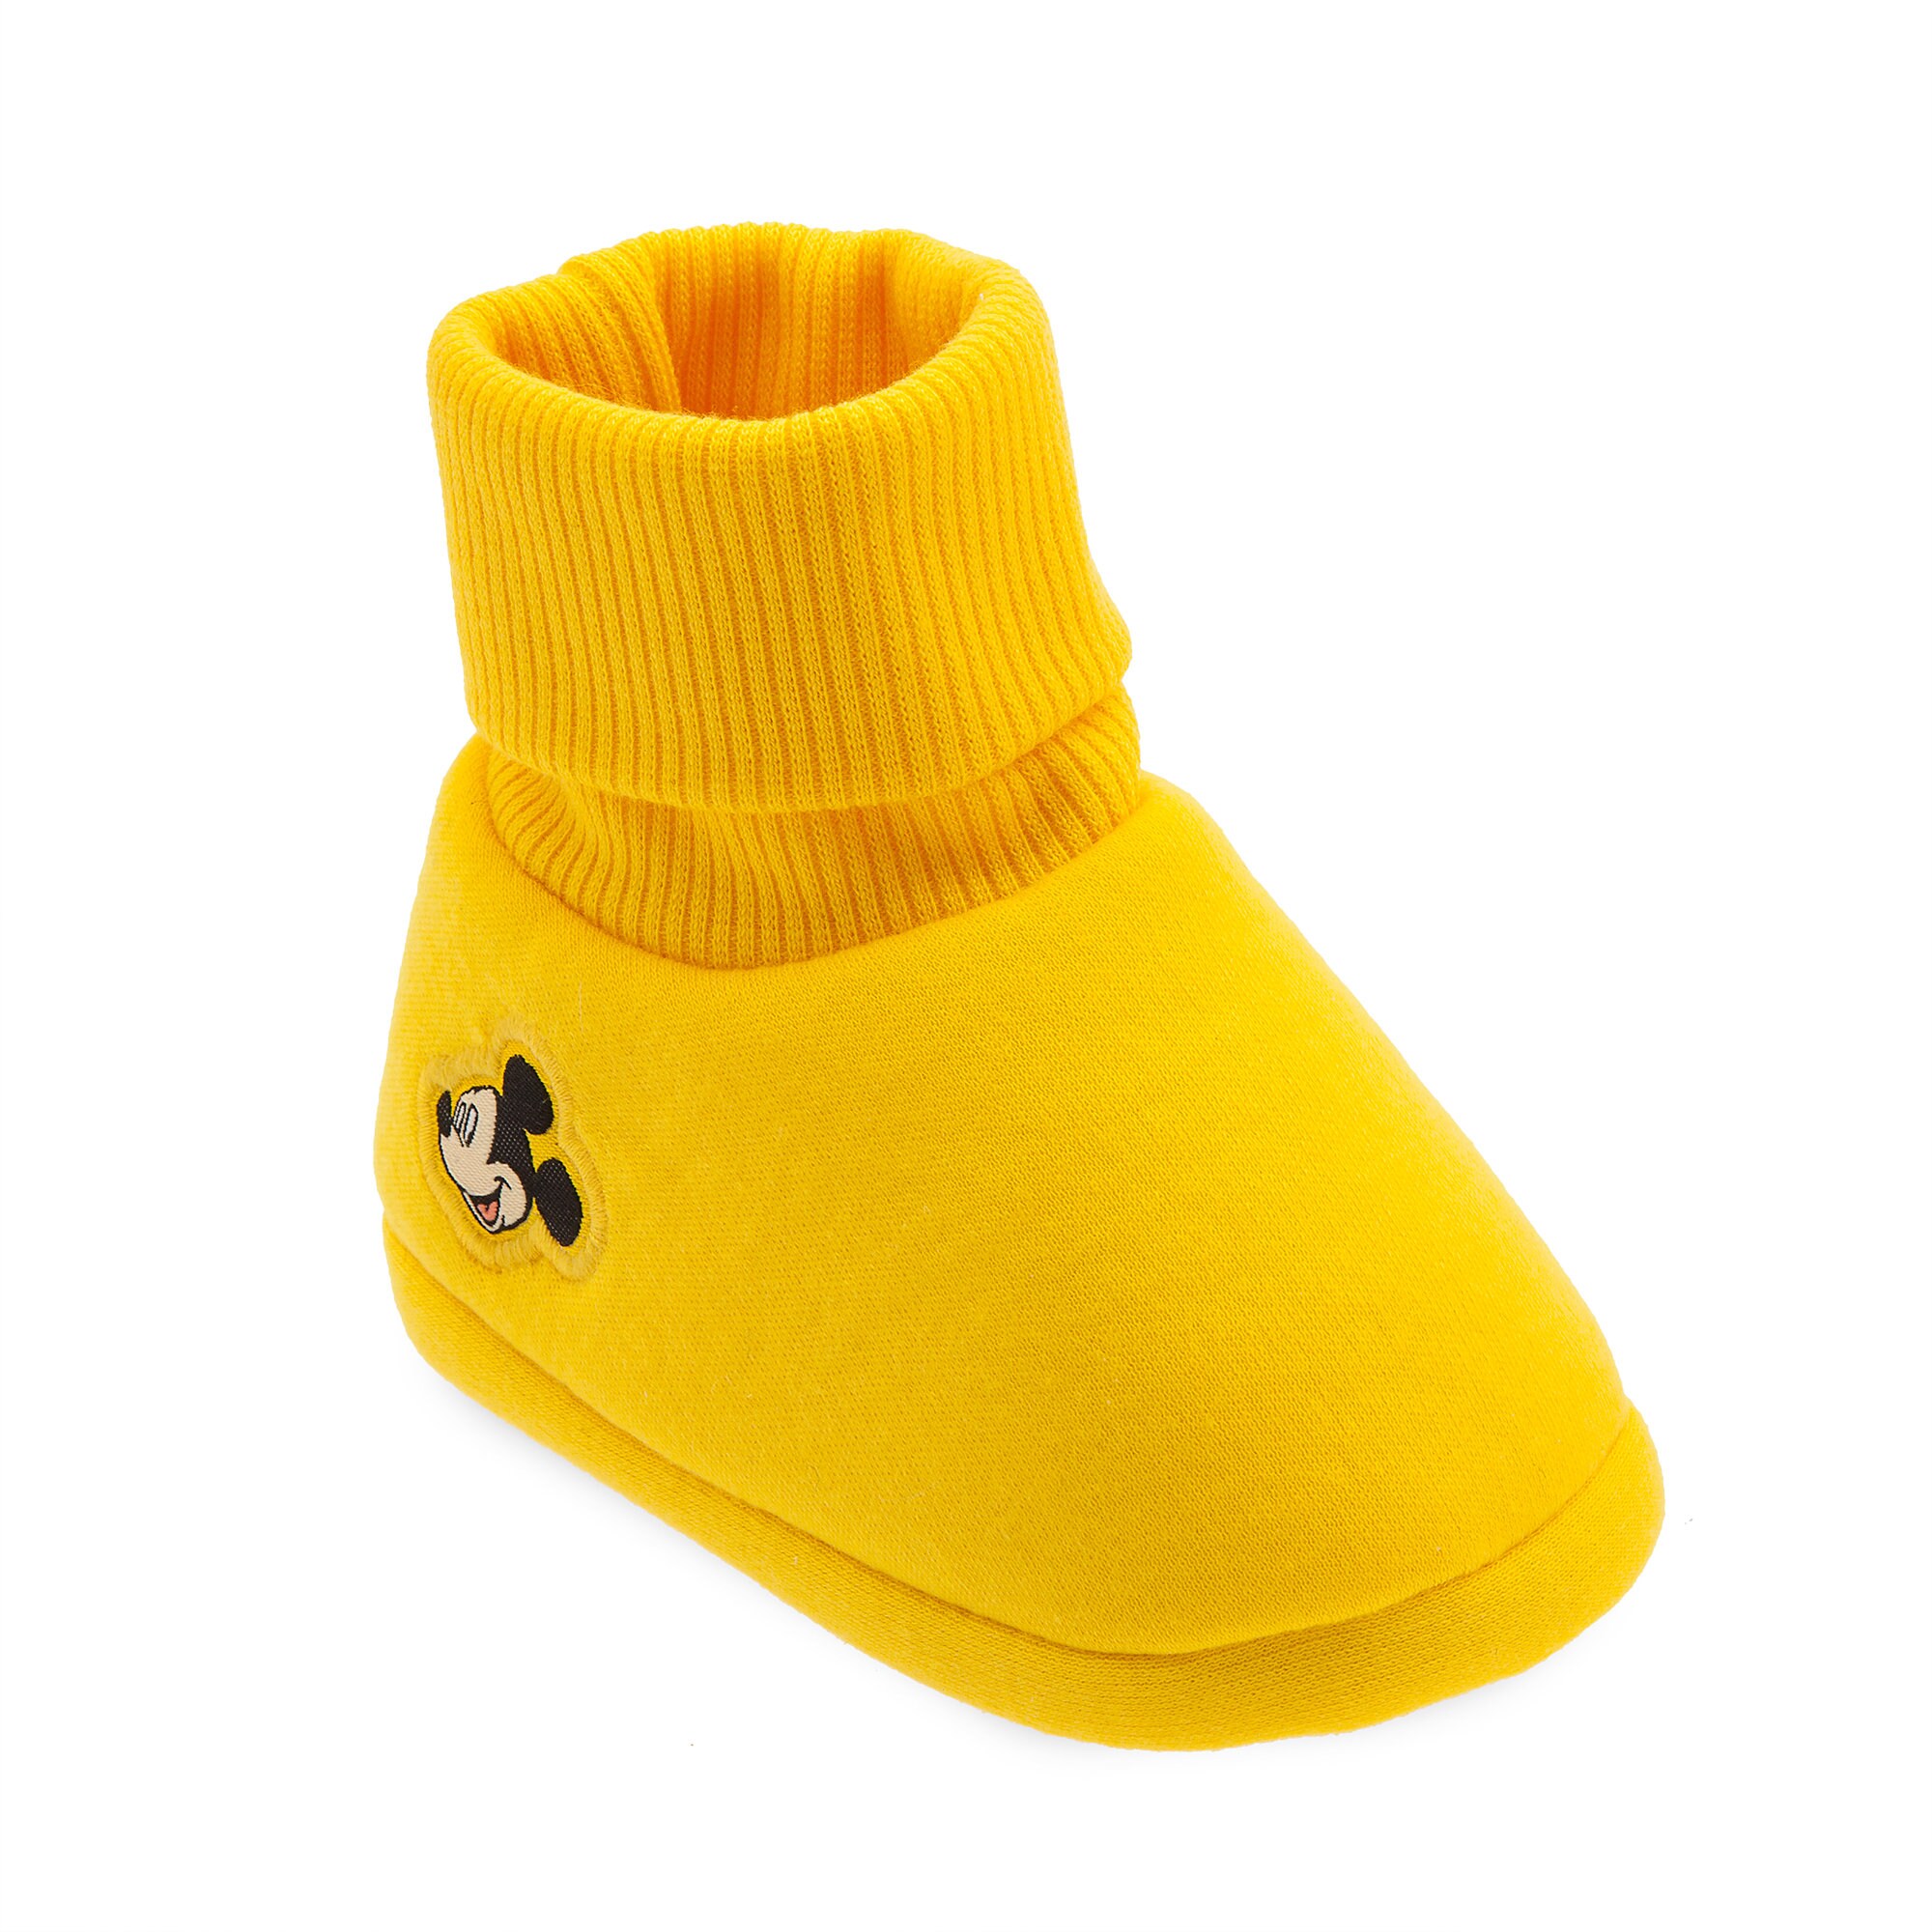 Mickey Mouse Costume Shoes for Baby available online – Dis Merchandise News